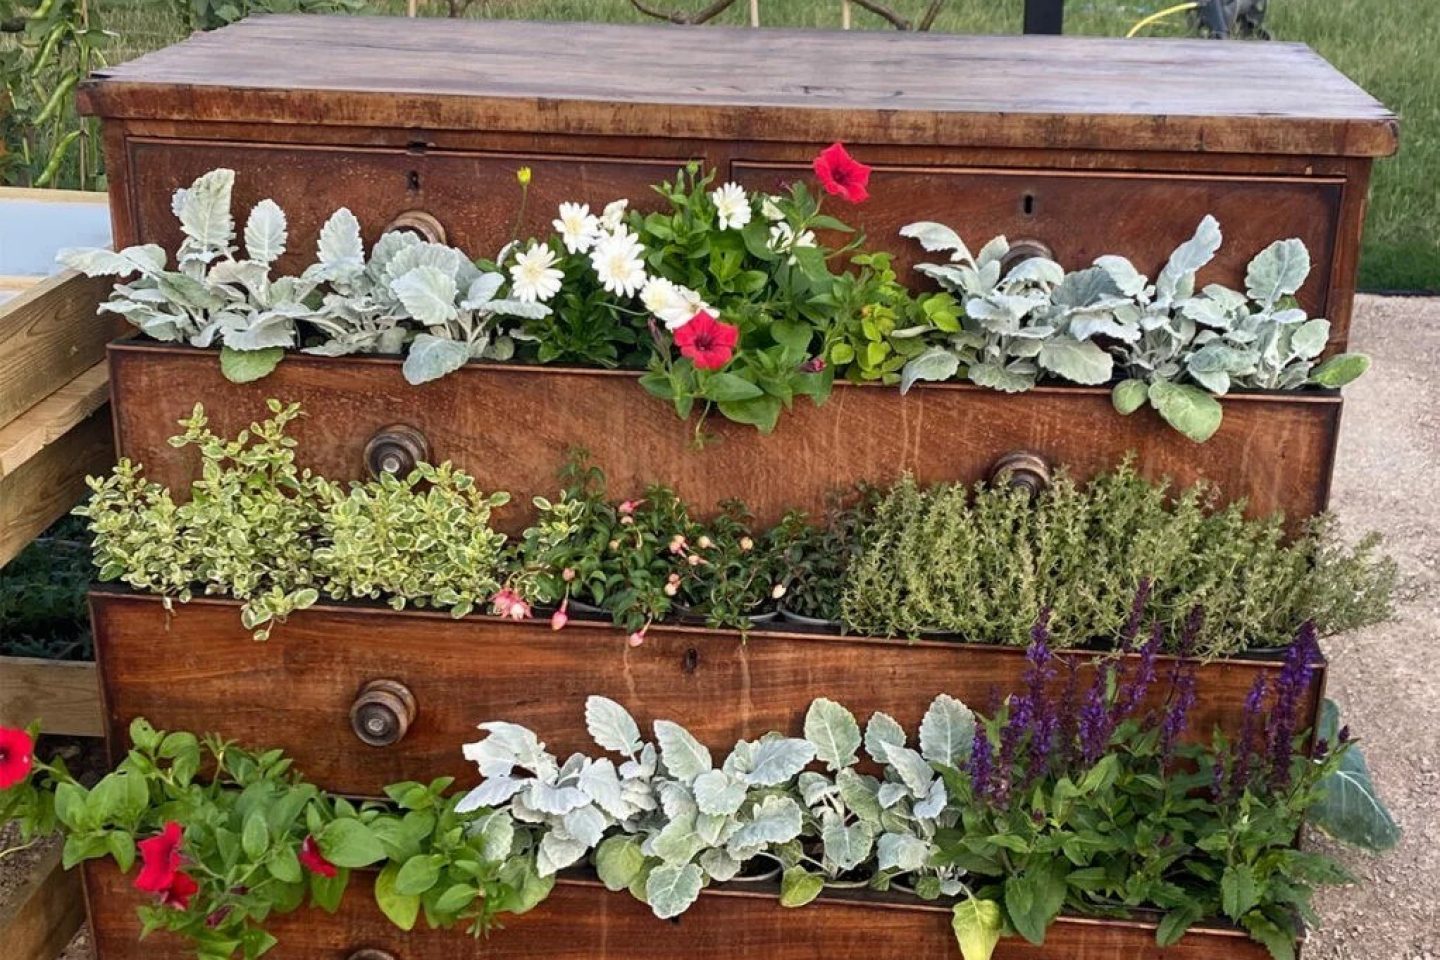 Recycled chest of drawers packed with flowers and plants